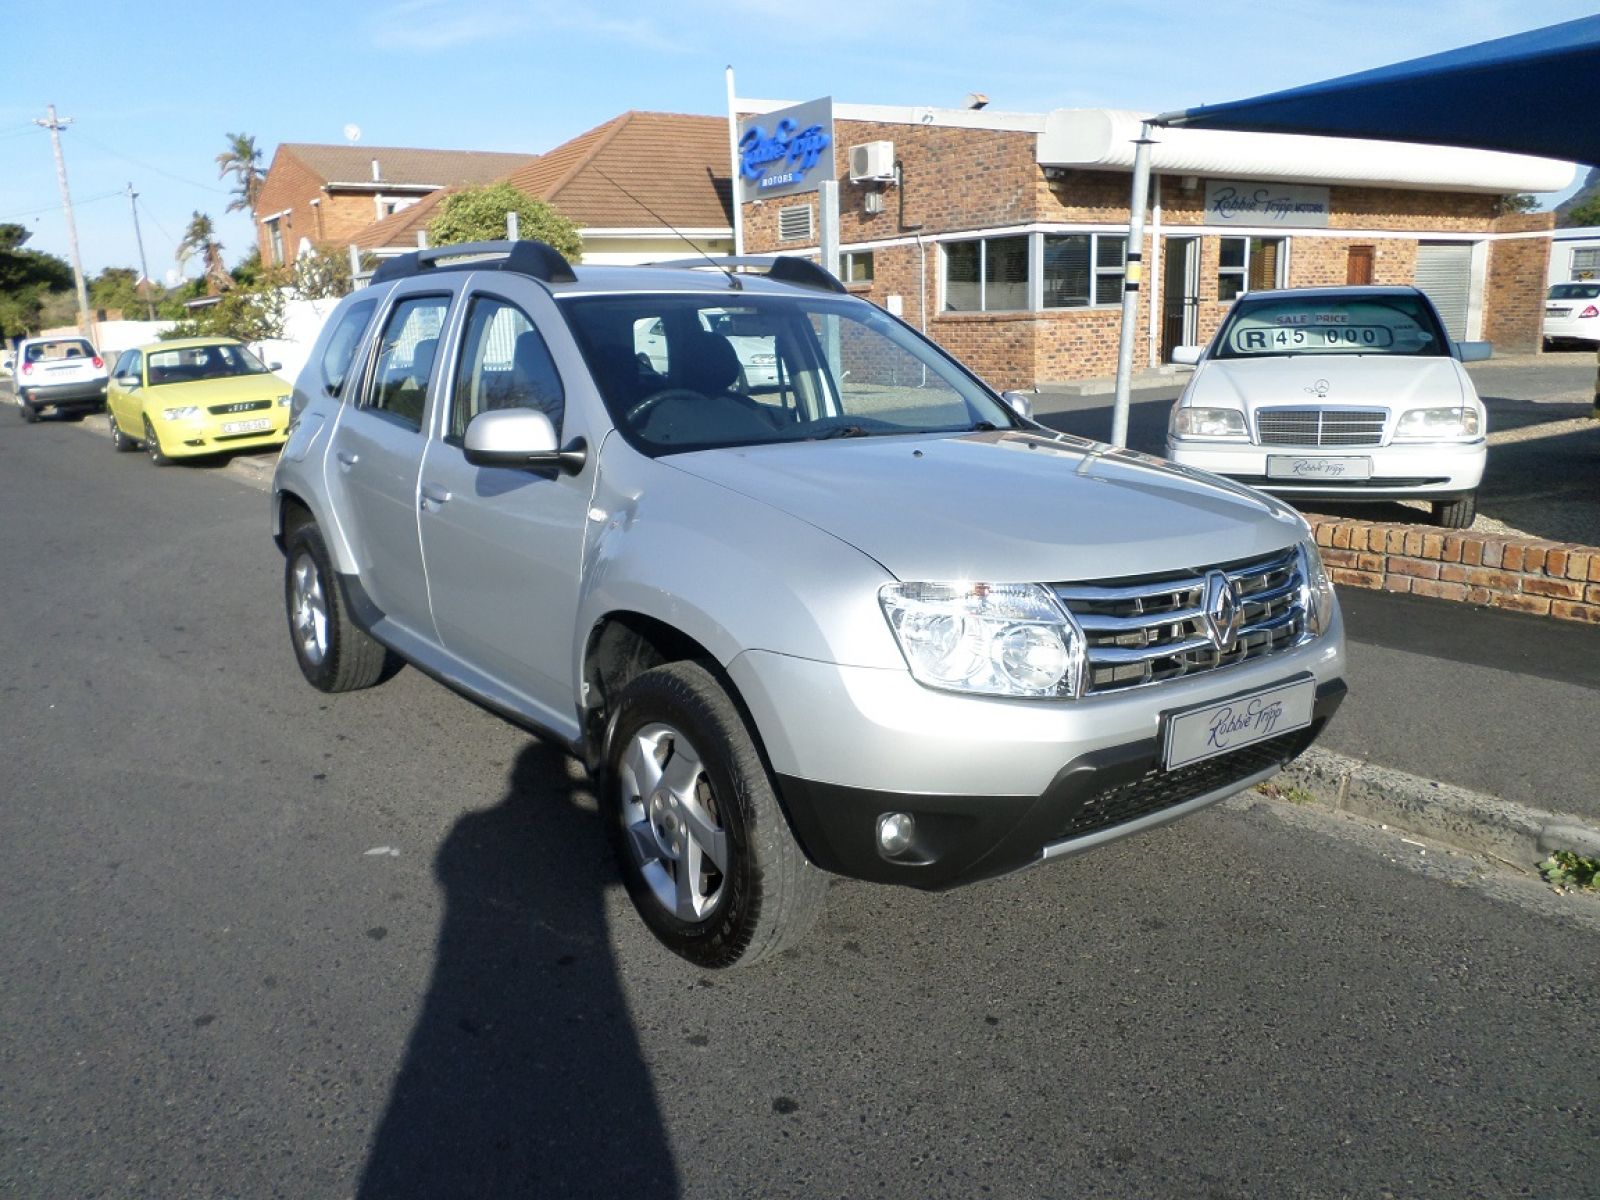 DUSTER DUSTER 1.6 DYNAMIQUE Specifications